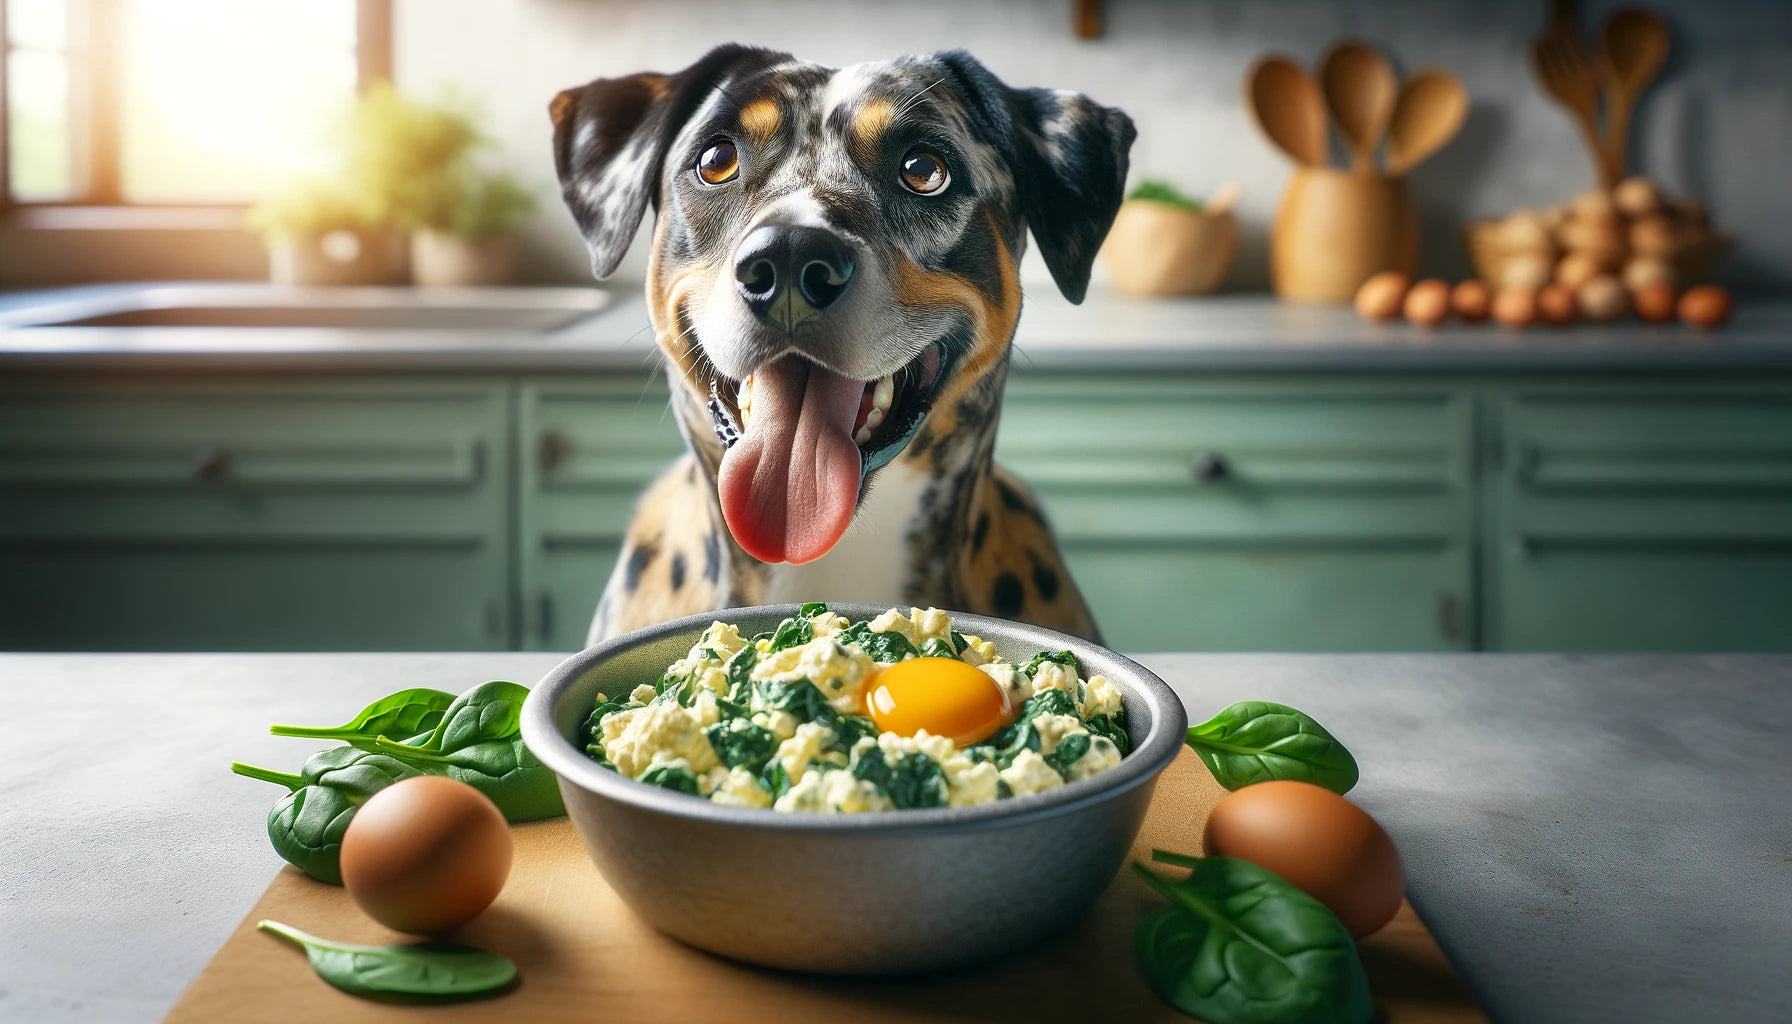 Egg Spinach Scramble in a dog's bowl with a Catahoula Leopard Dog sitting next to it.